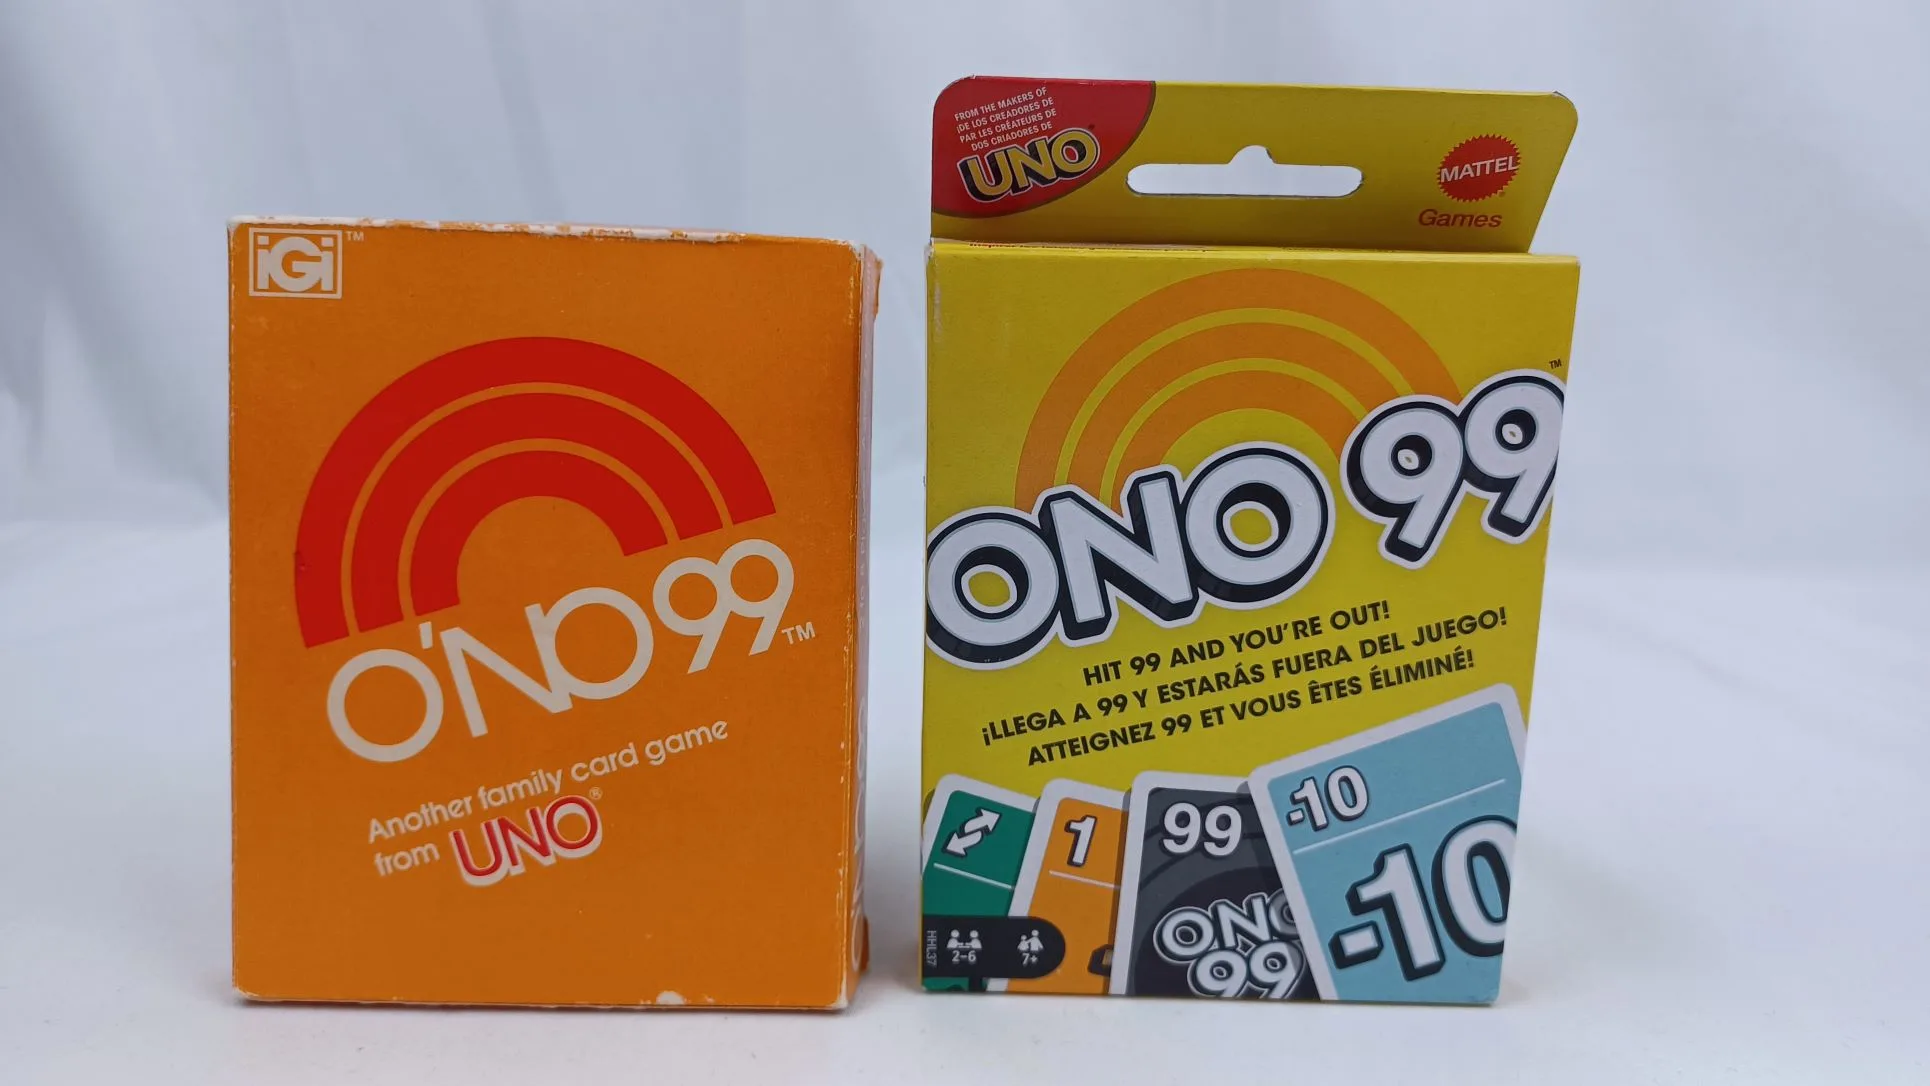 Box for ONO 99